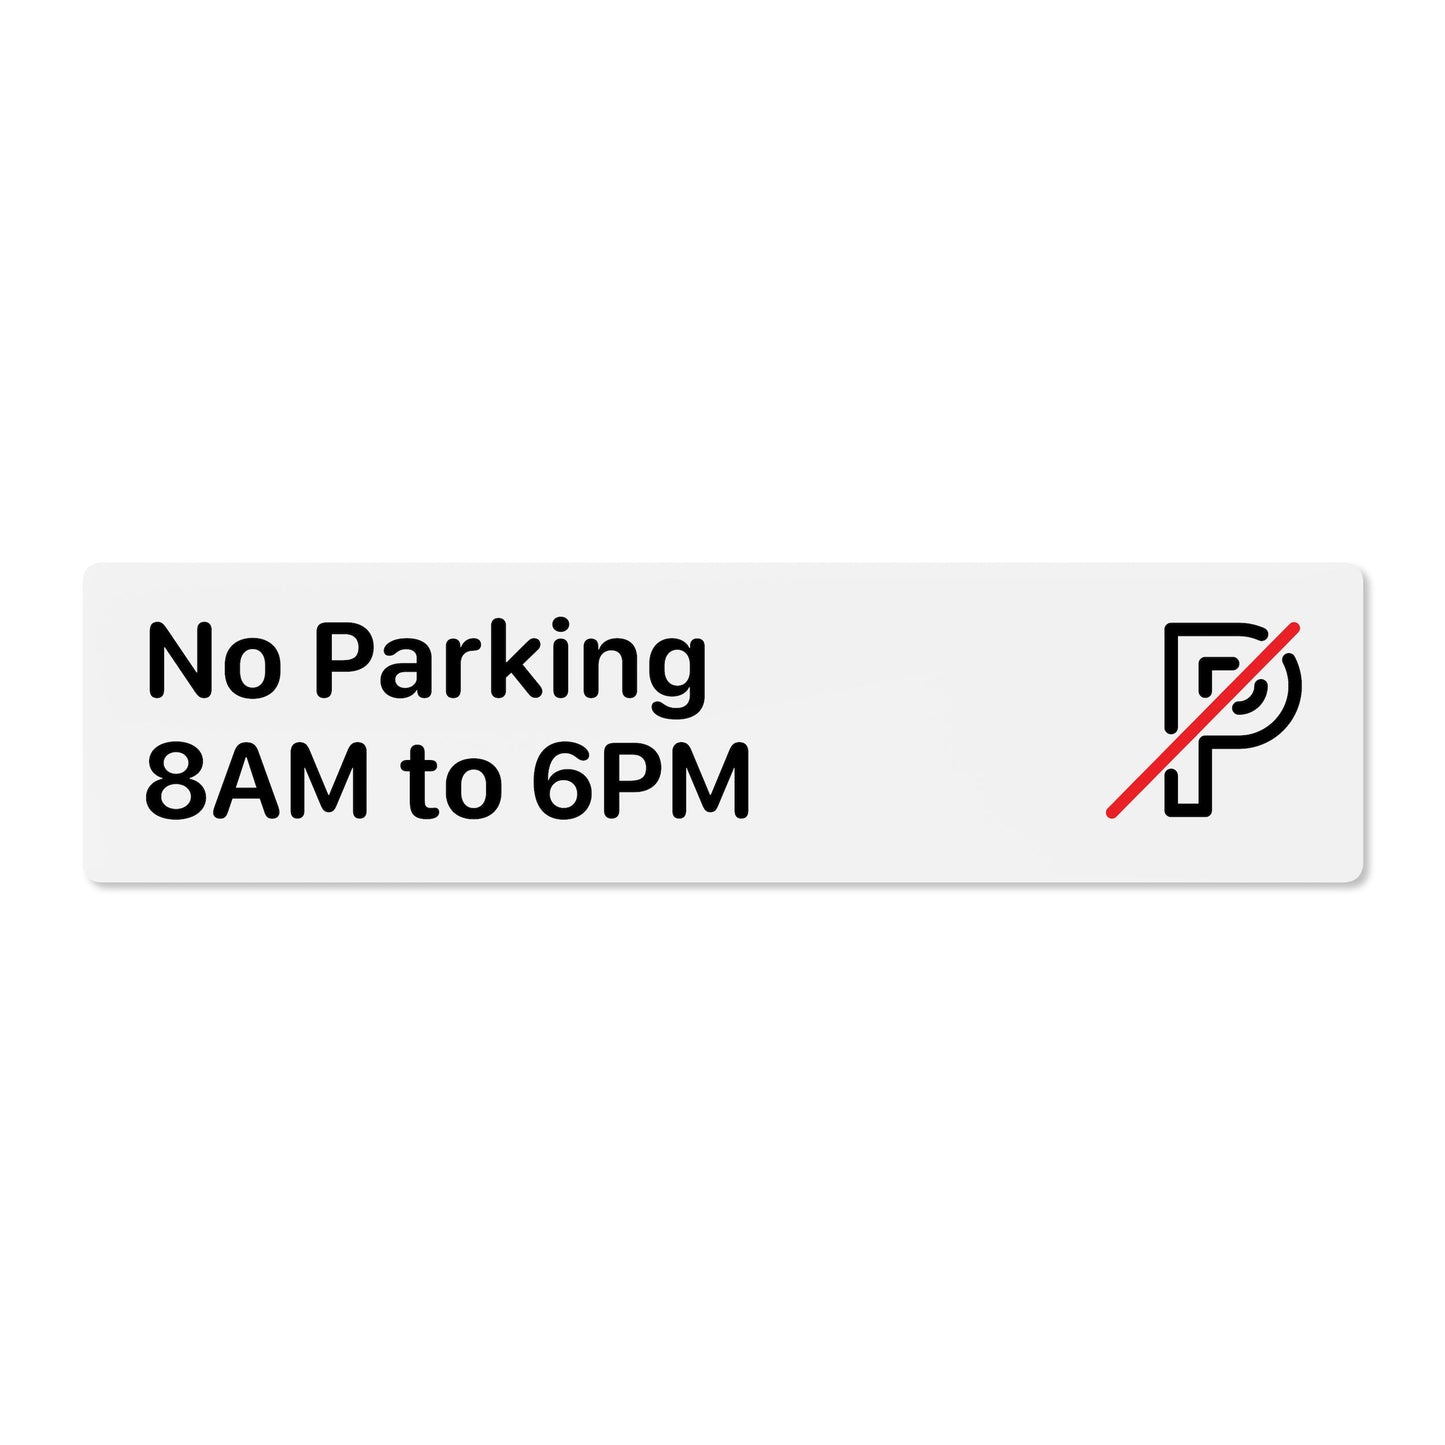 No Parking 8AM to 6PM